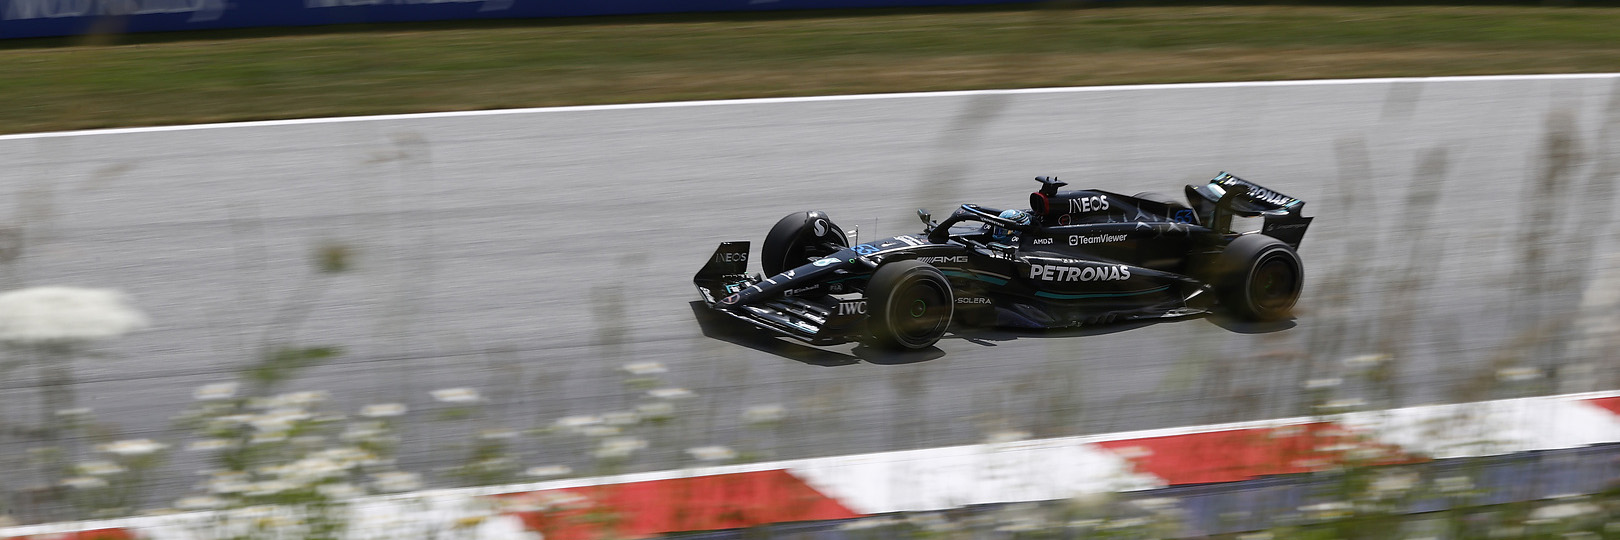 George Russell racing at the Austrian Grand Prix